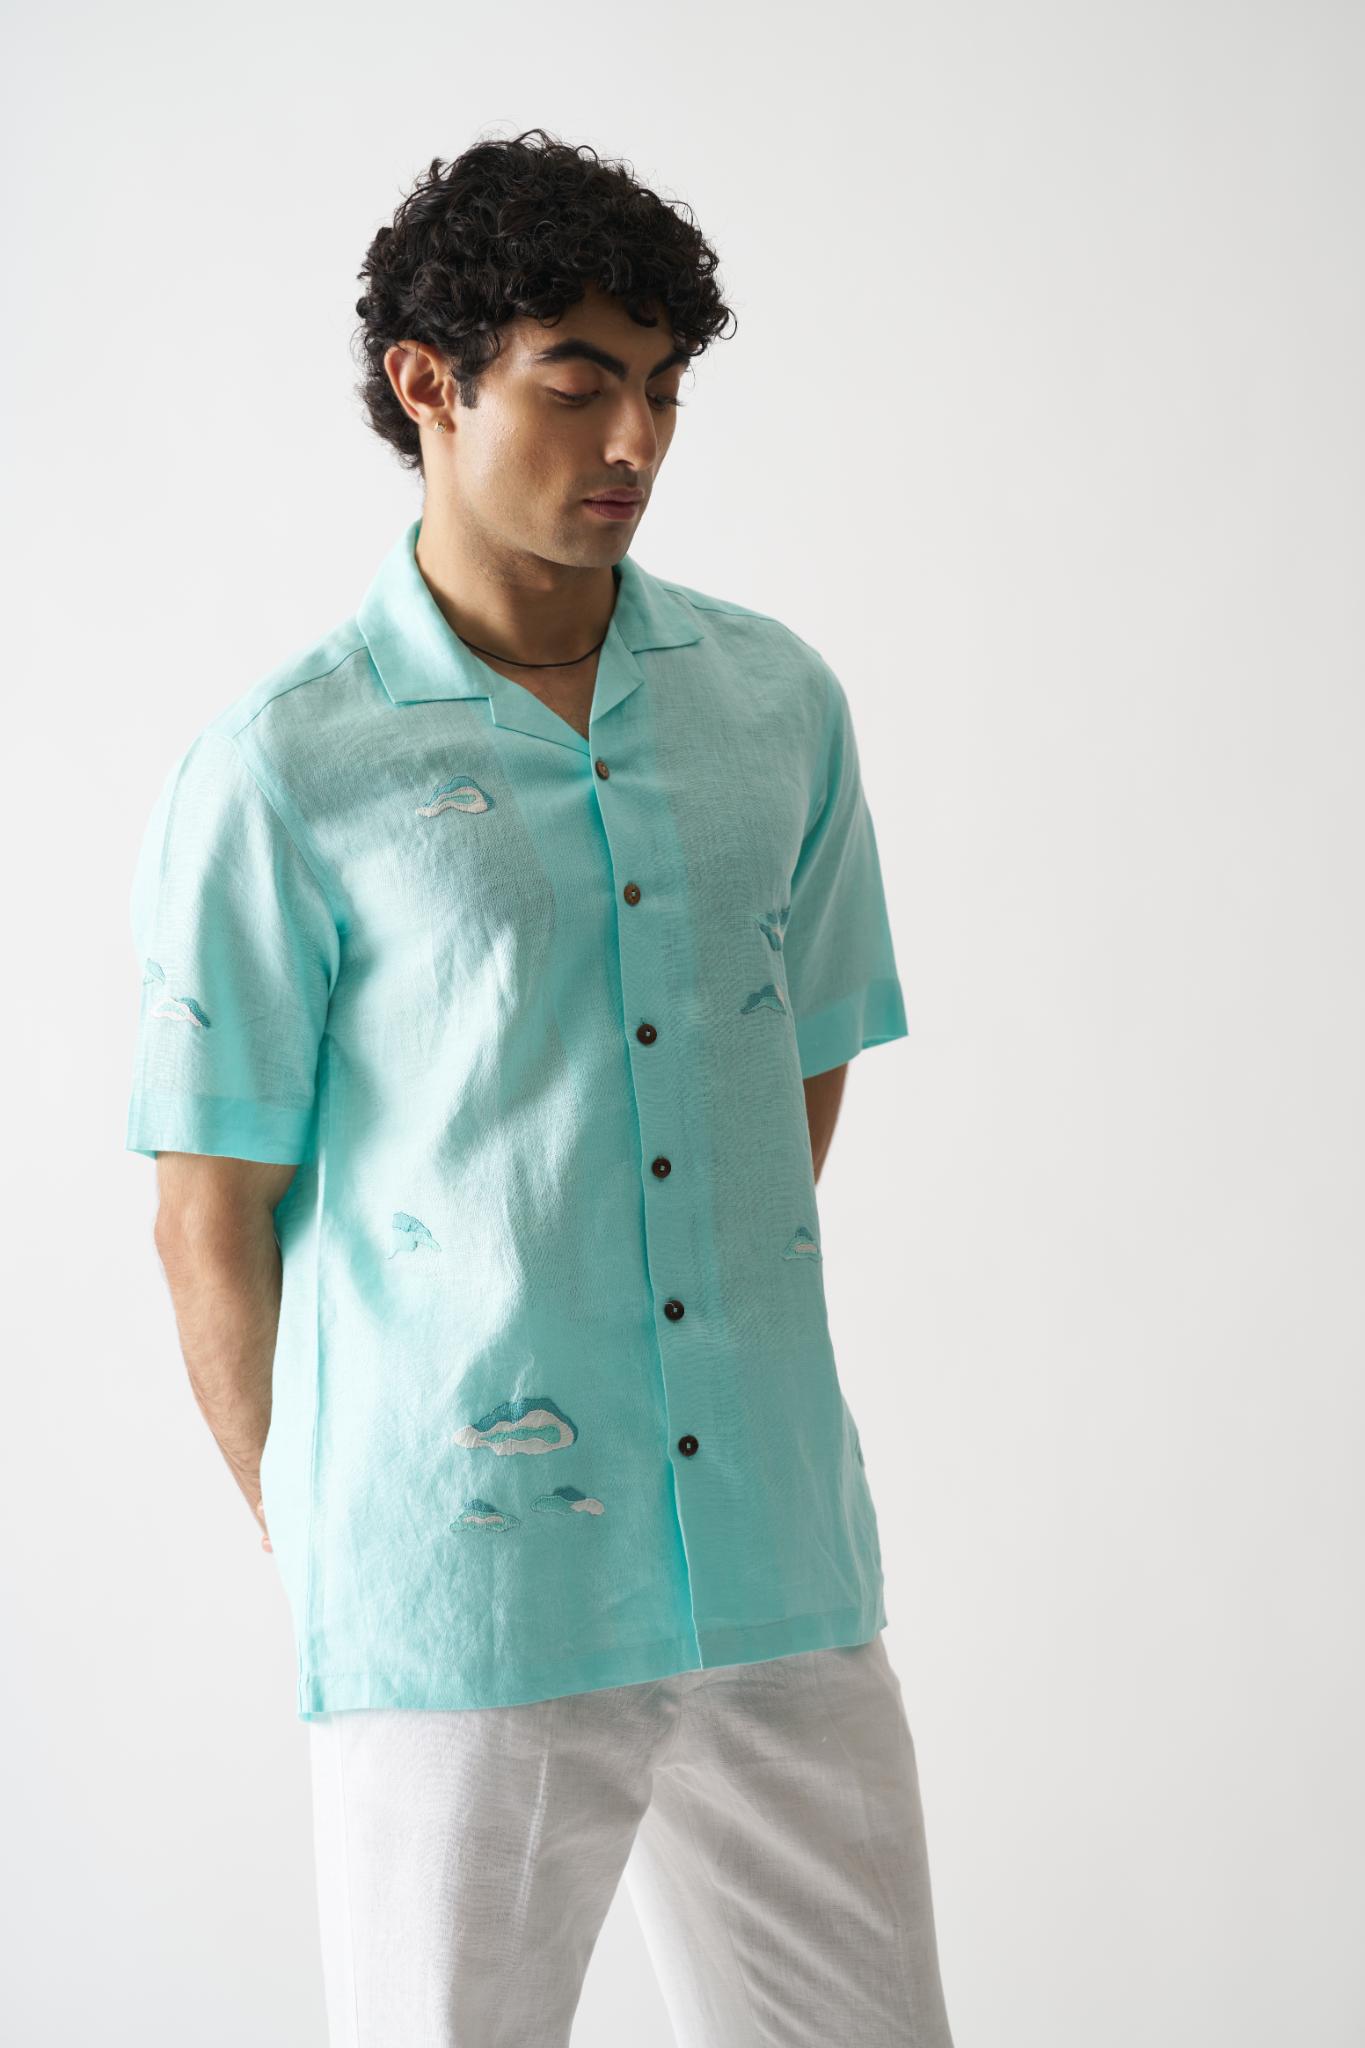 Sky Is The Limit - Mens Hand Embroidered Pure Linen Shirt - CiceroniShirtsCultura Studio